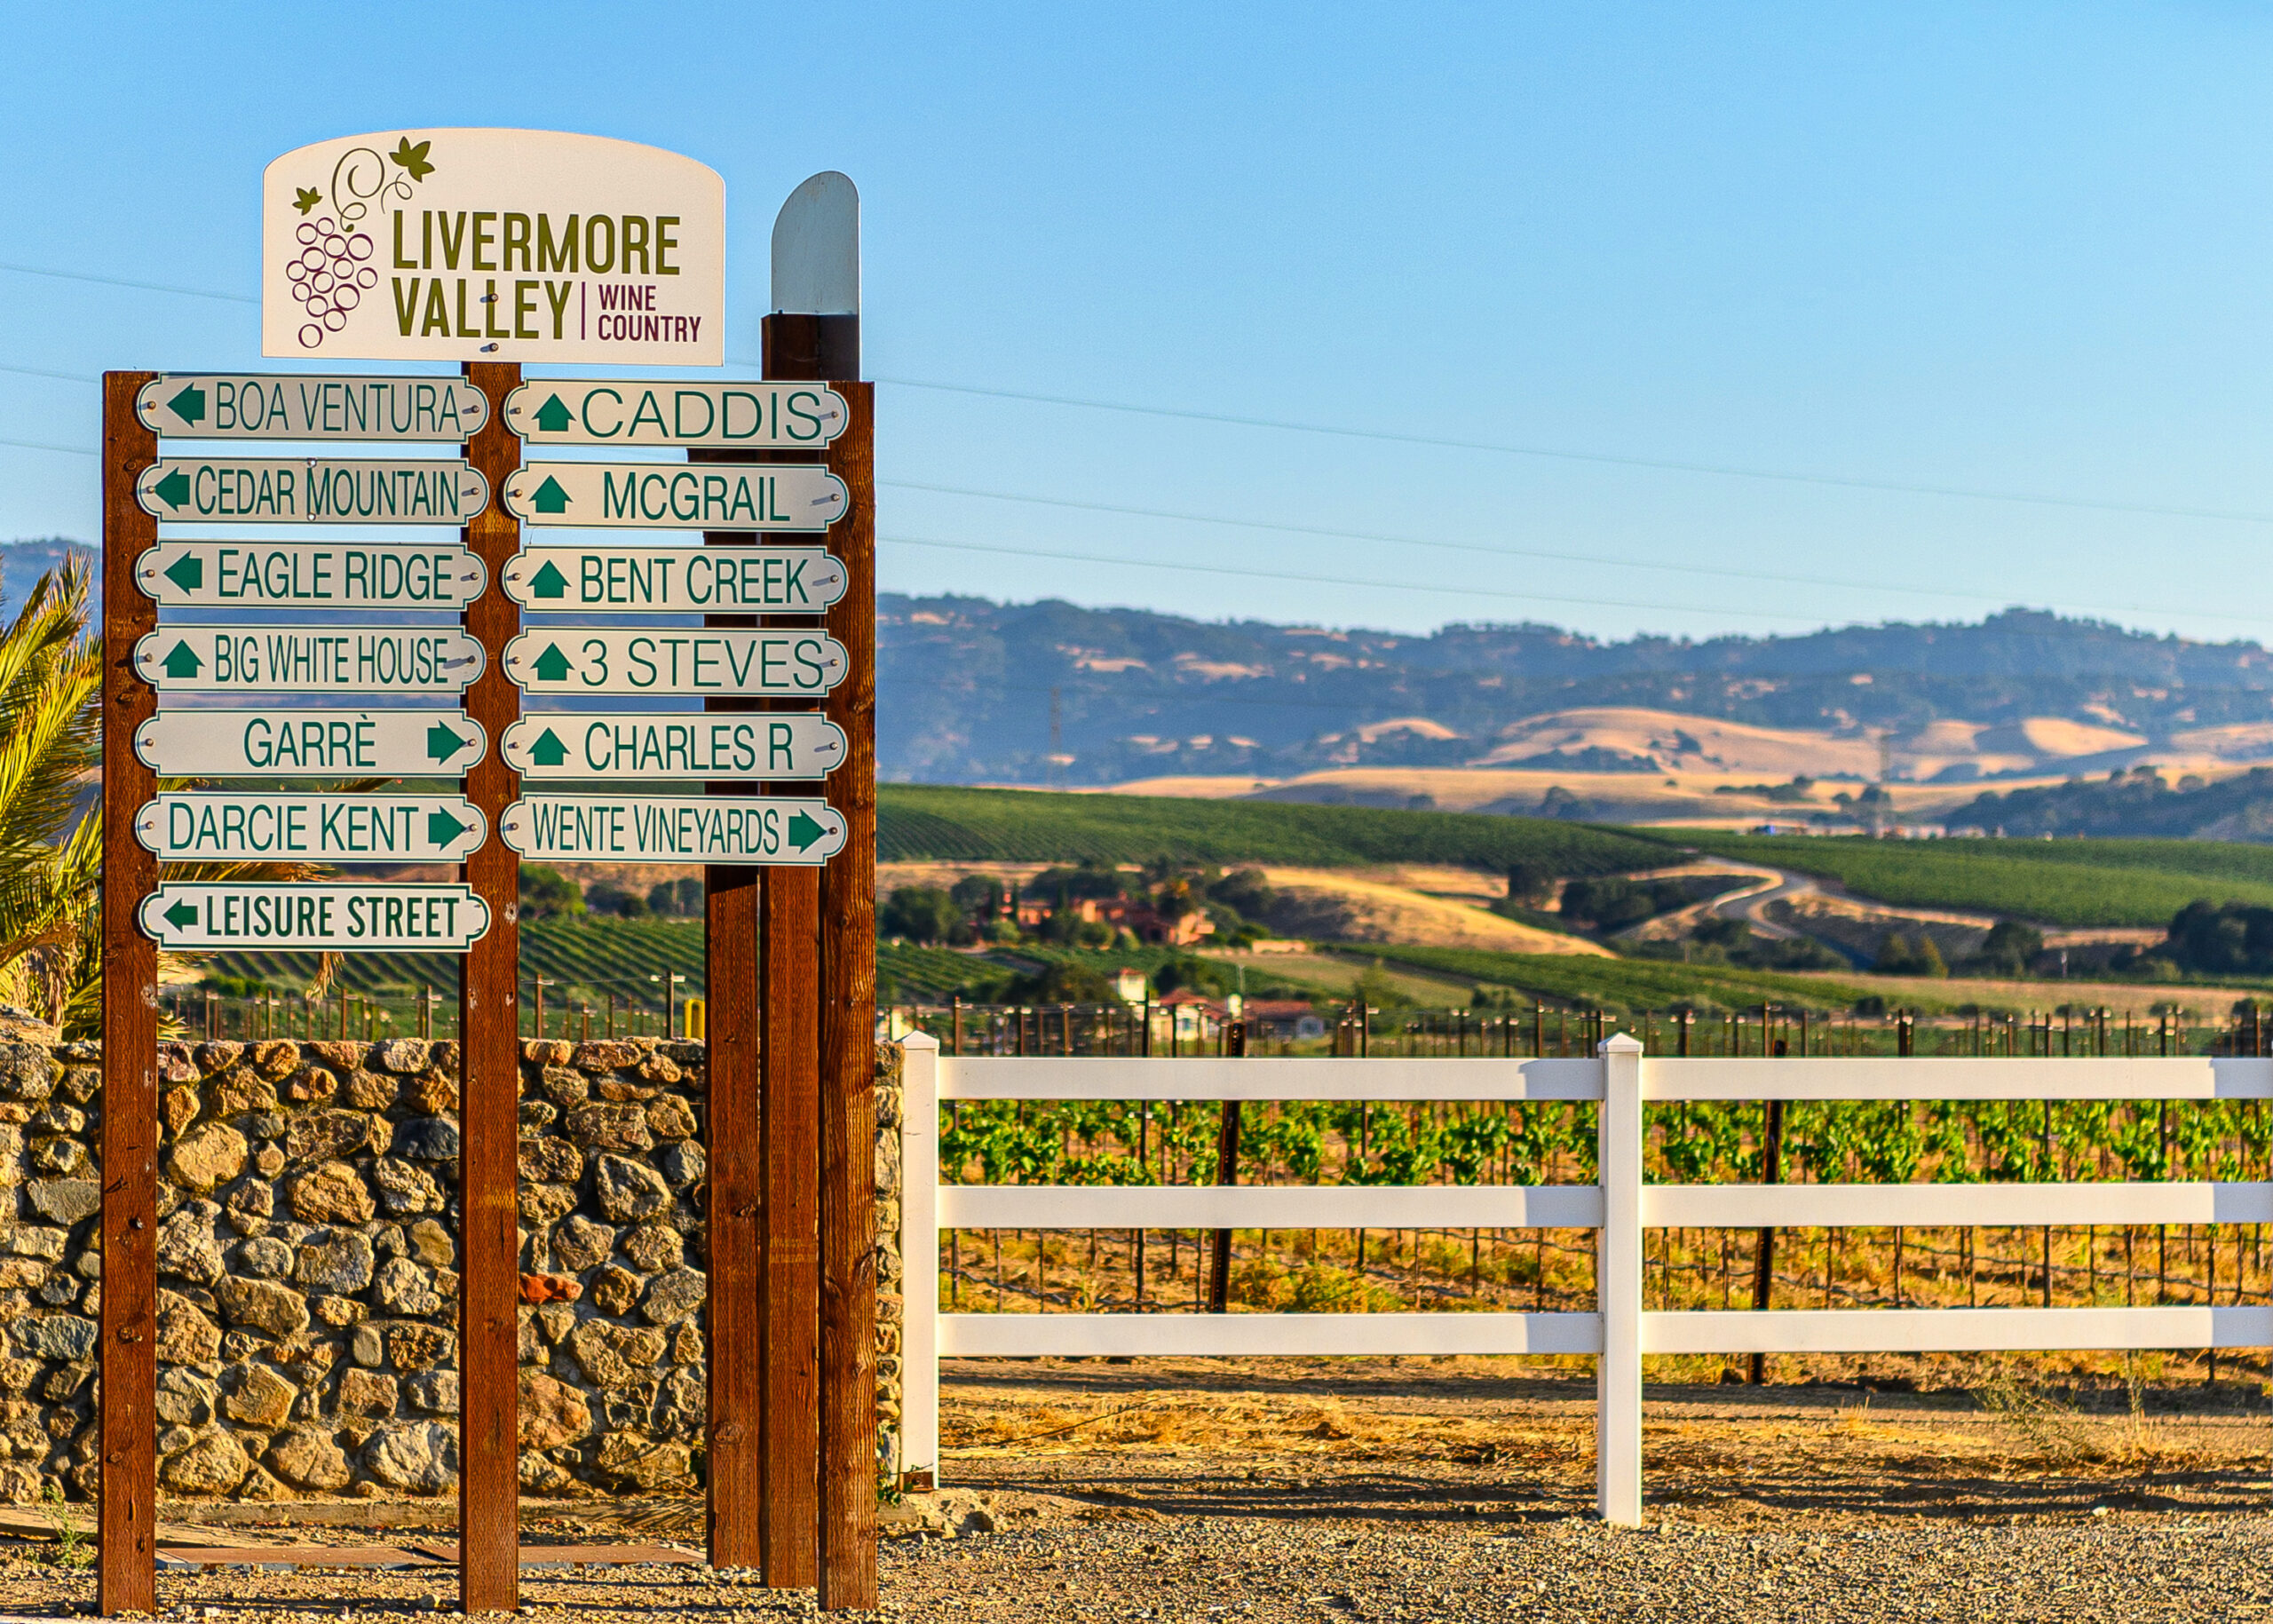 Livermore wineries